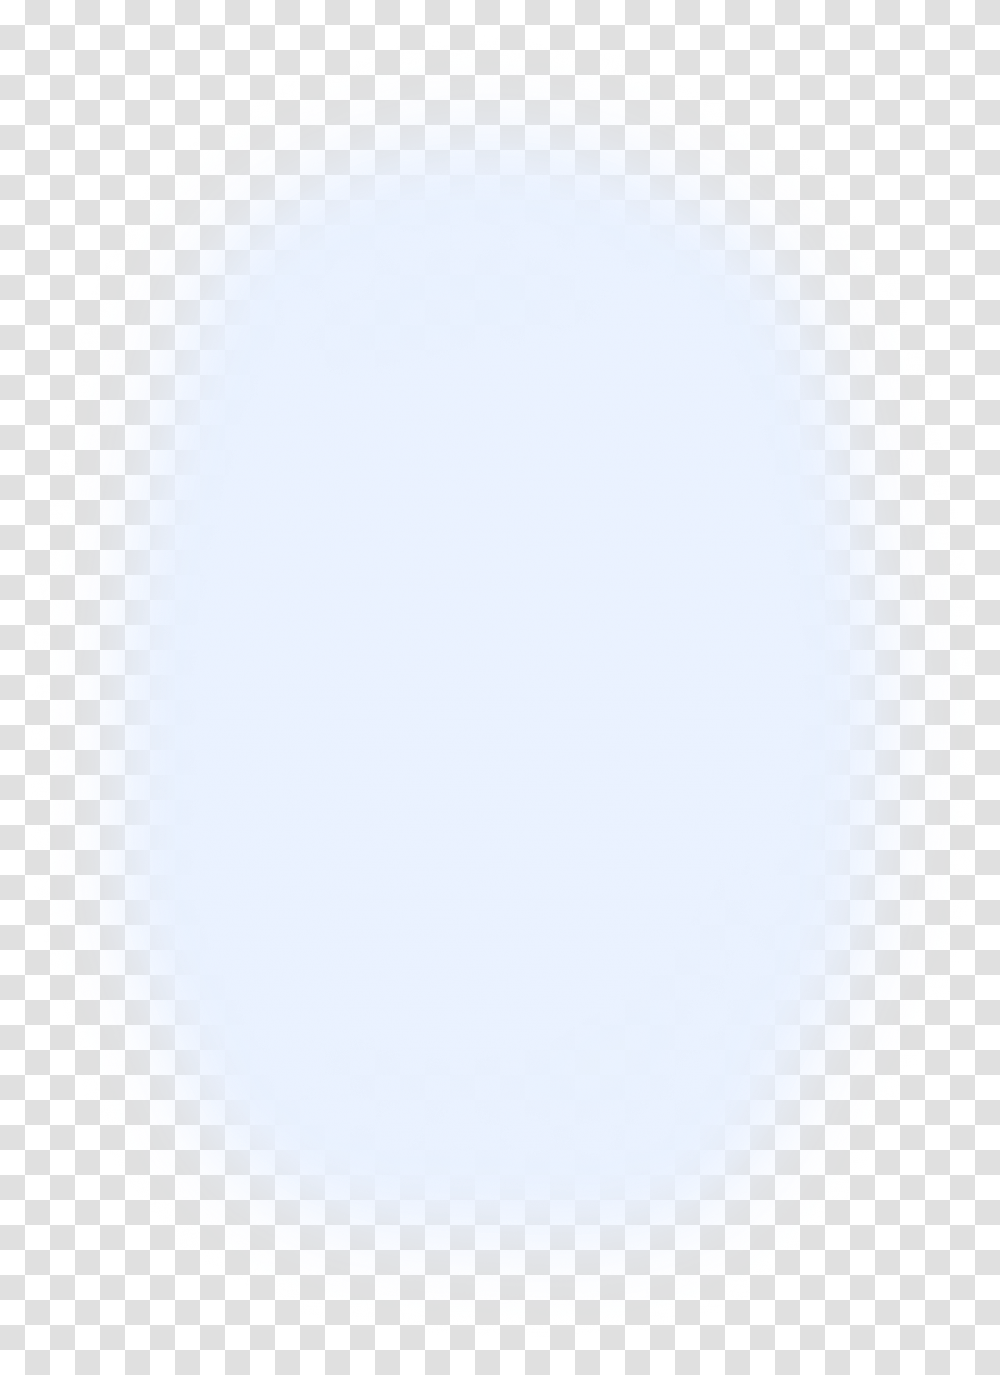 Oval Plain Color Fade Frc 2468 Oval Fade, Balloon, Egg, Food Transparent Png